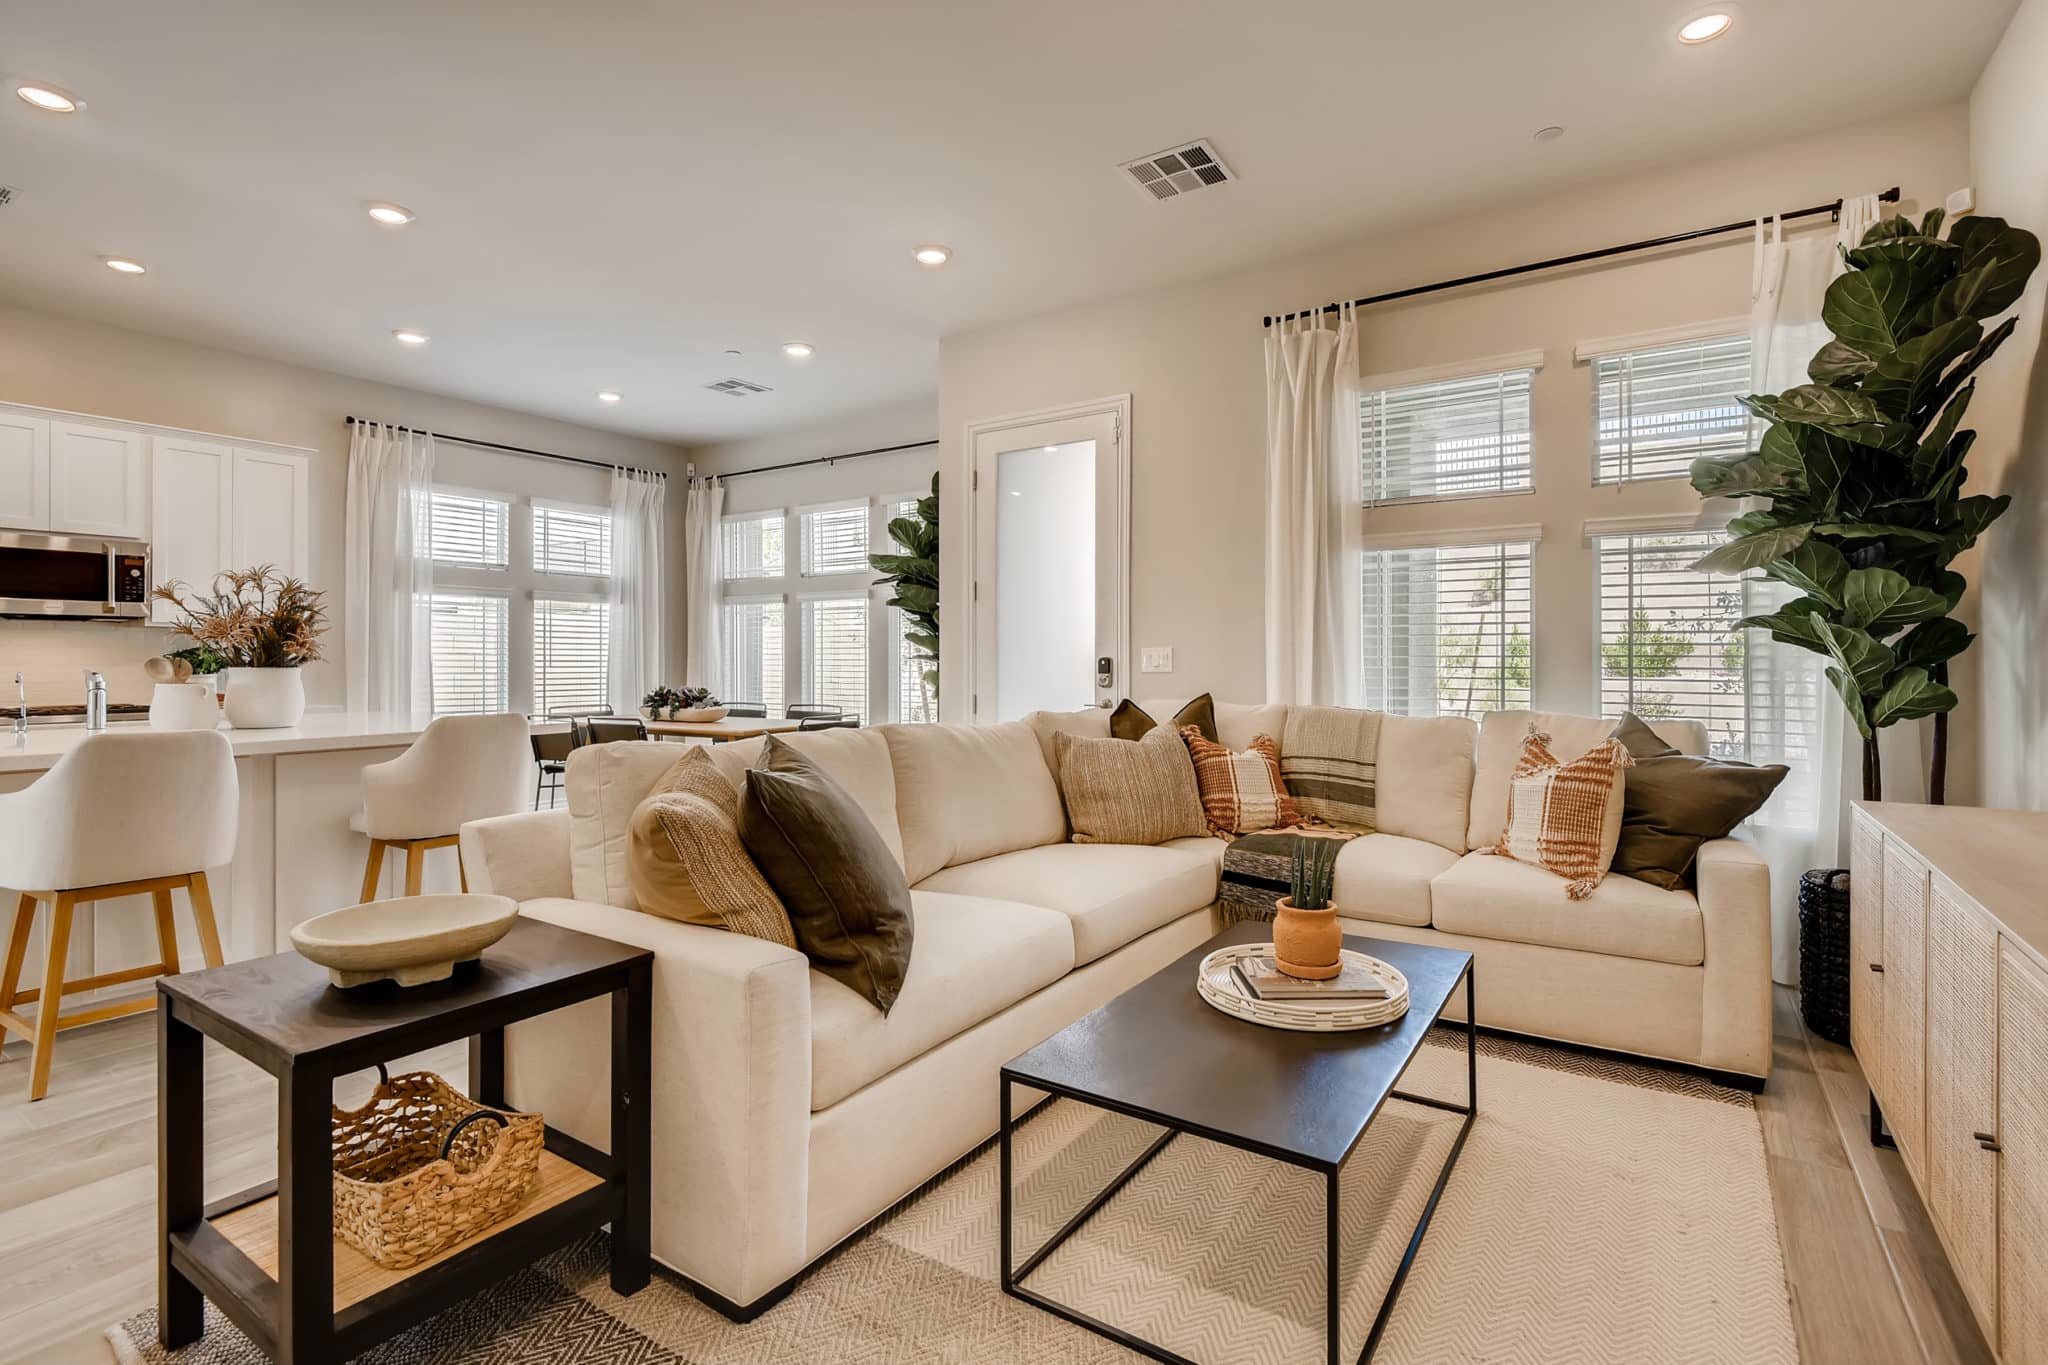 Living Room of Connery model at Heritage by Lennar